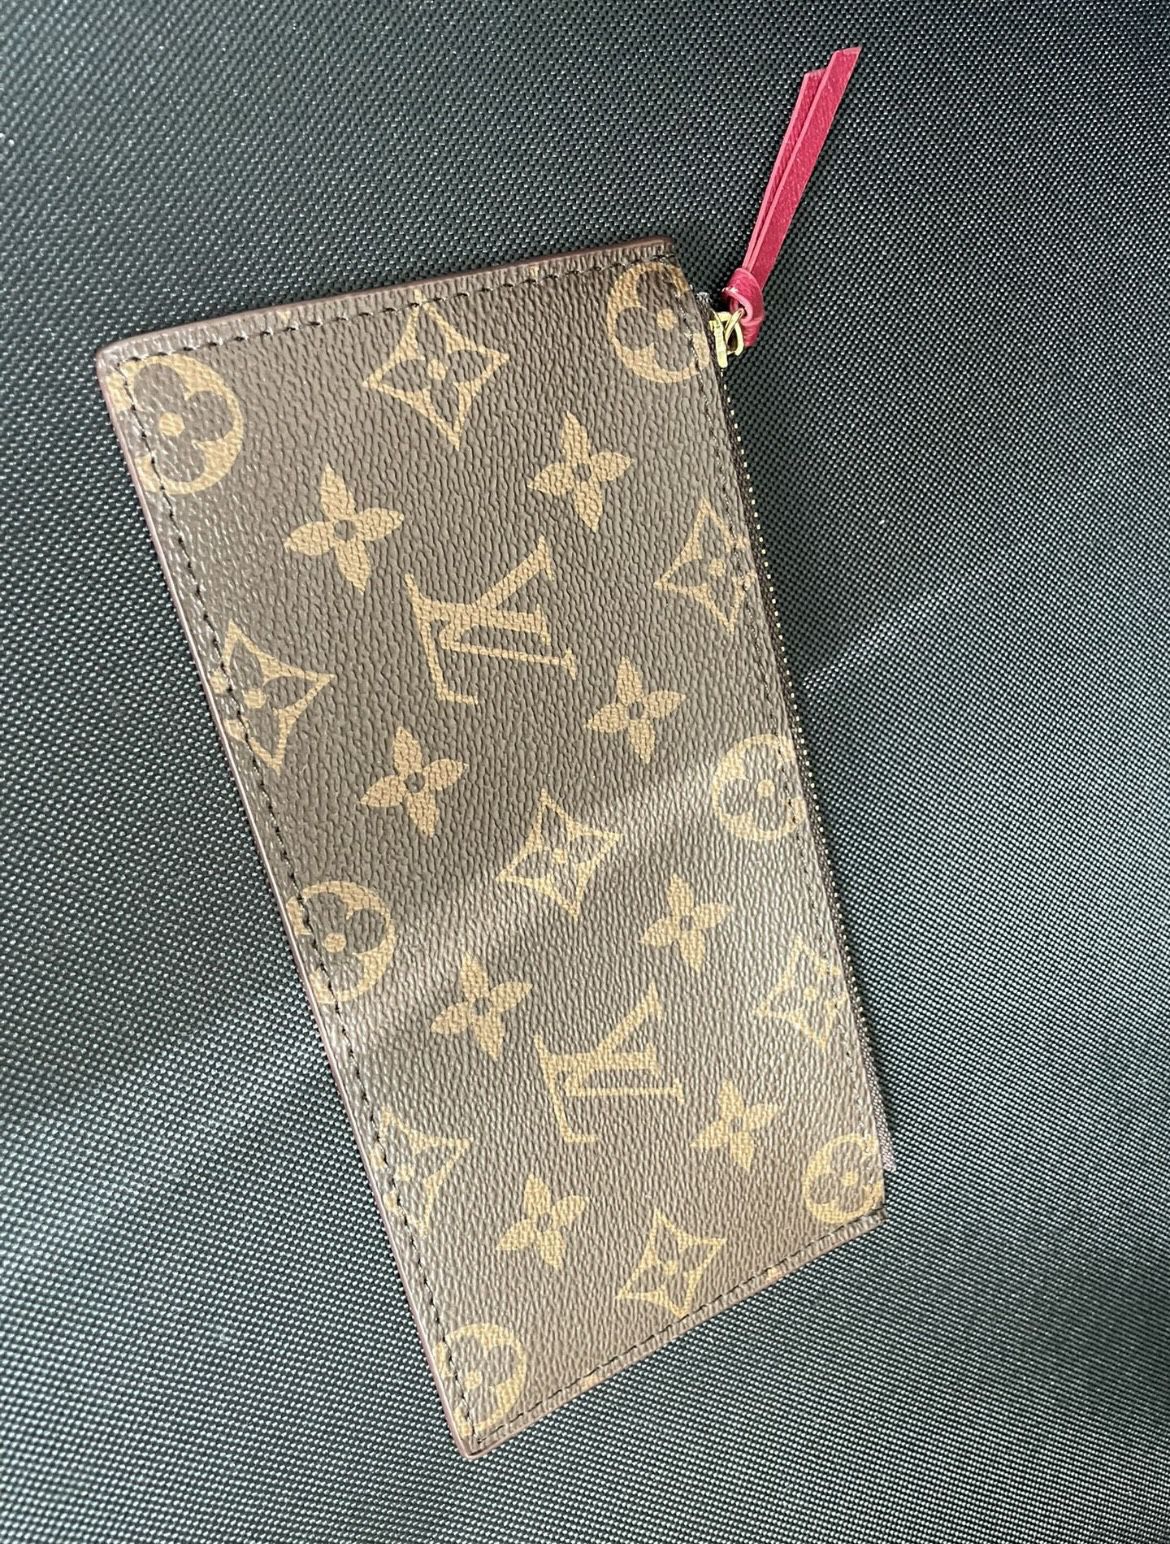 Authentic Louis Vuitton Adele Compact Wallet! for Sale in Lodi, CA - OfferUp